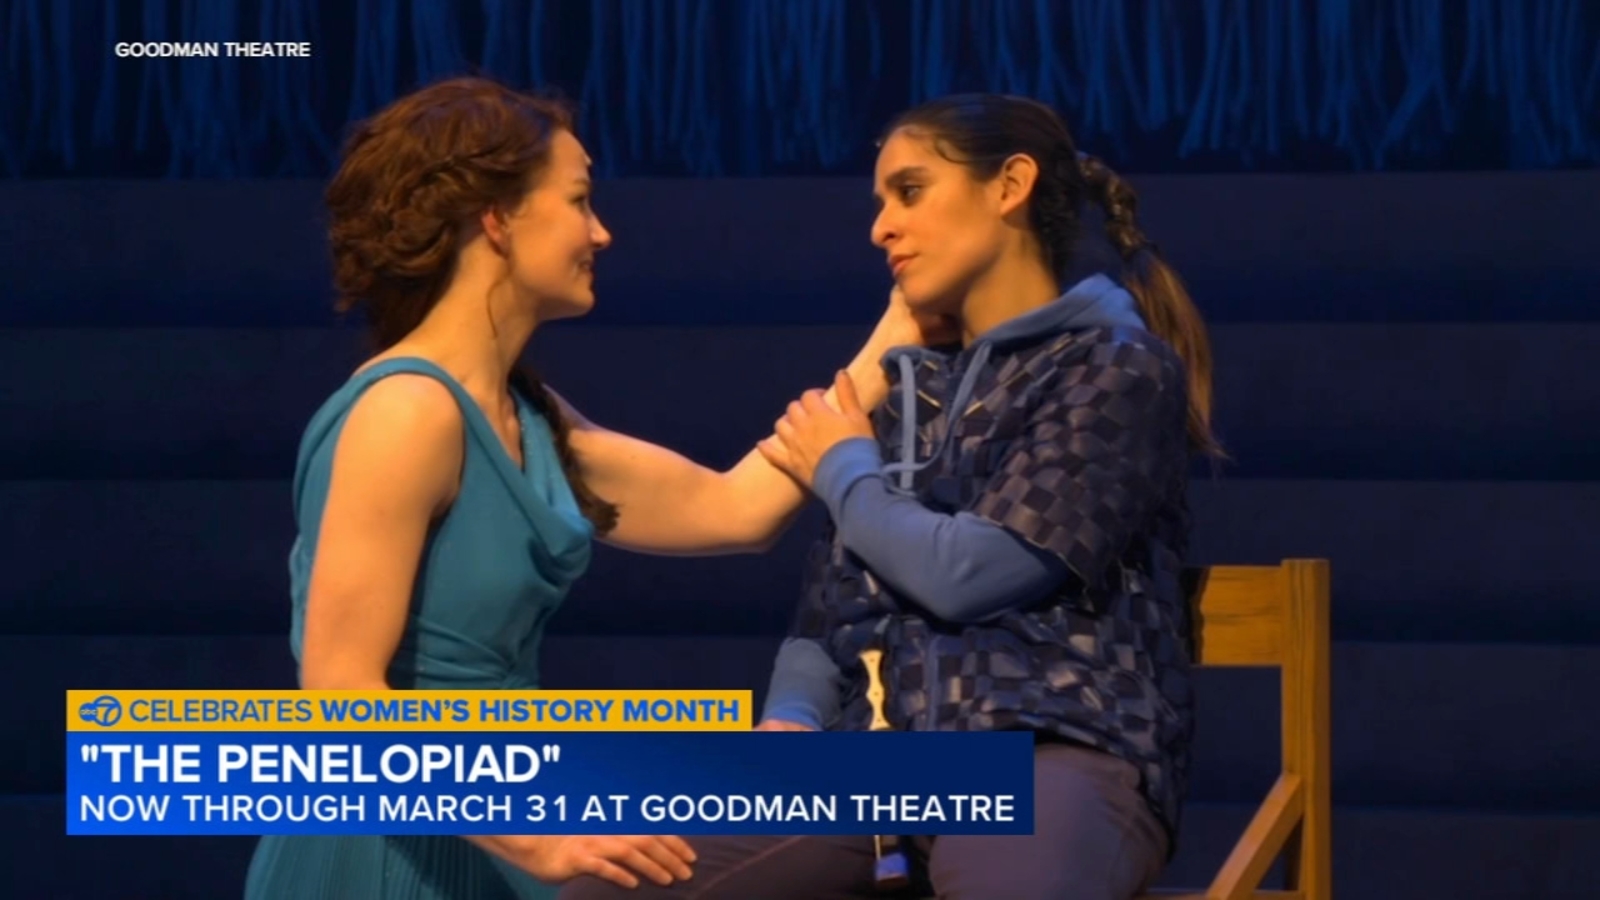 Celebrate Women’s History Month at Chicago’s Goodman Theatre as Jennifer Morrison leads all-female cast in ‘The Penelopiad’ [Video]